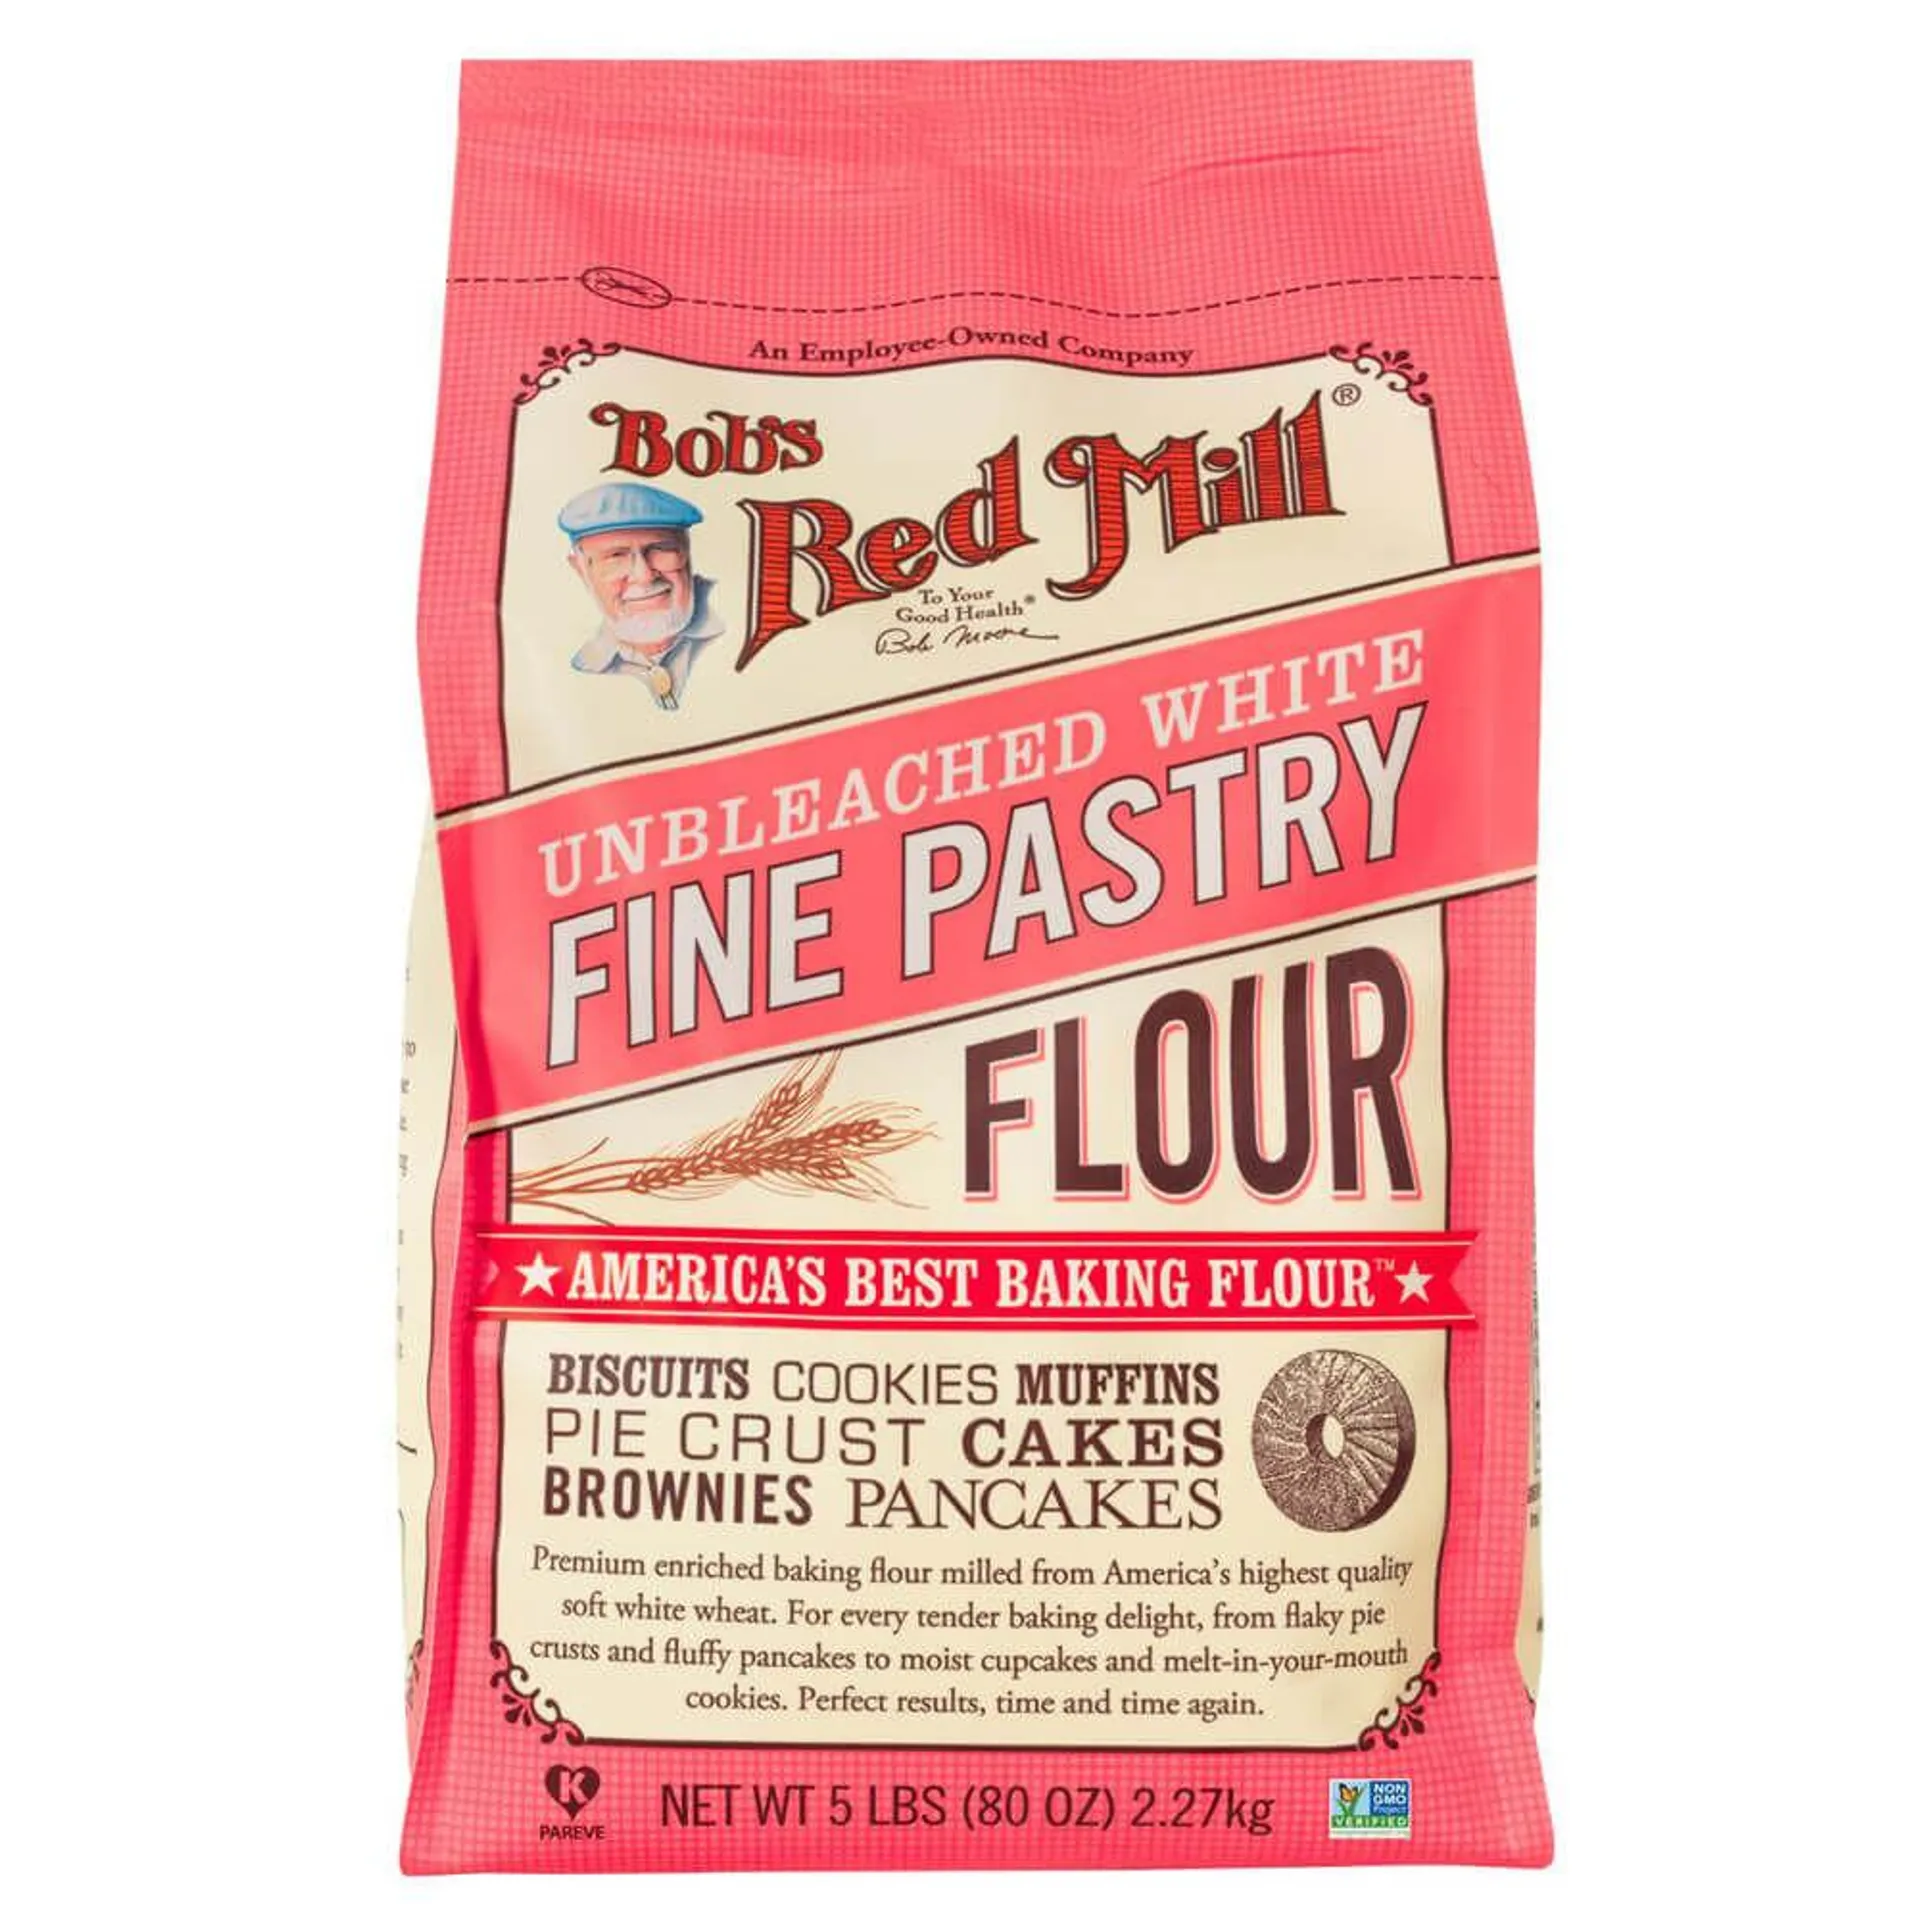 Bob’s Red Mill Unbleached White Fine Pastry Flour, 5 lbs